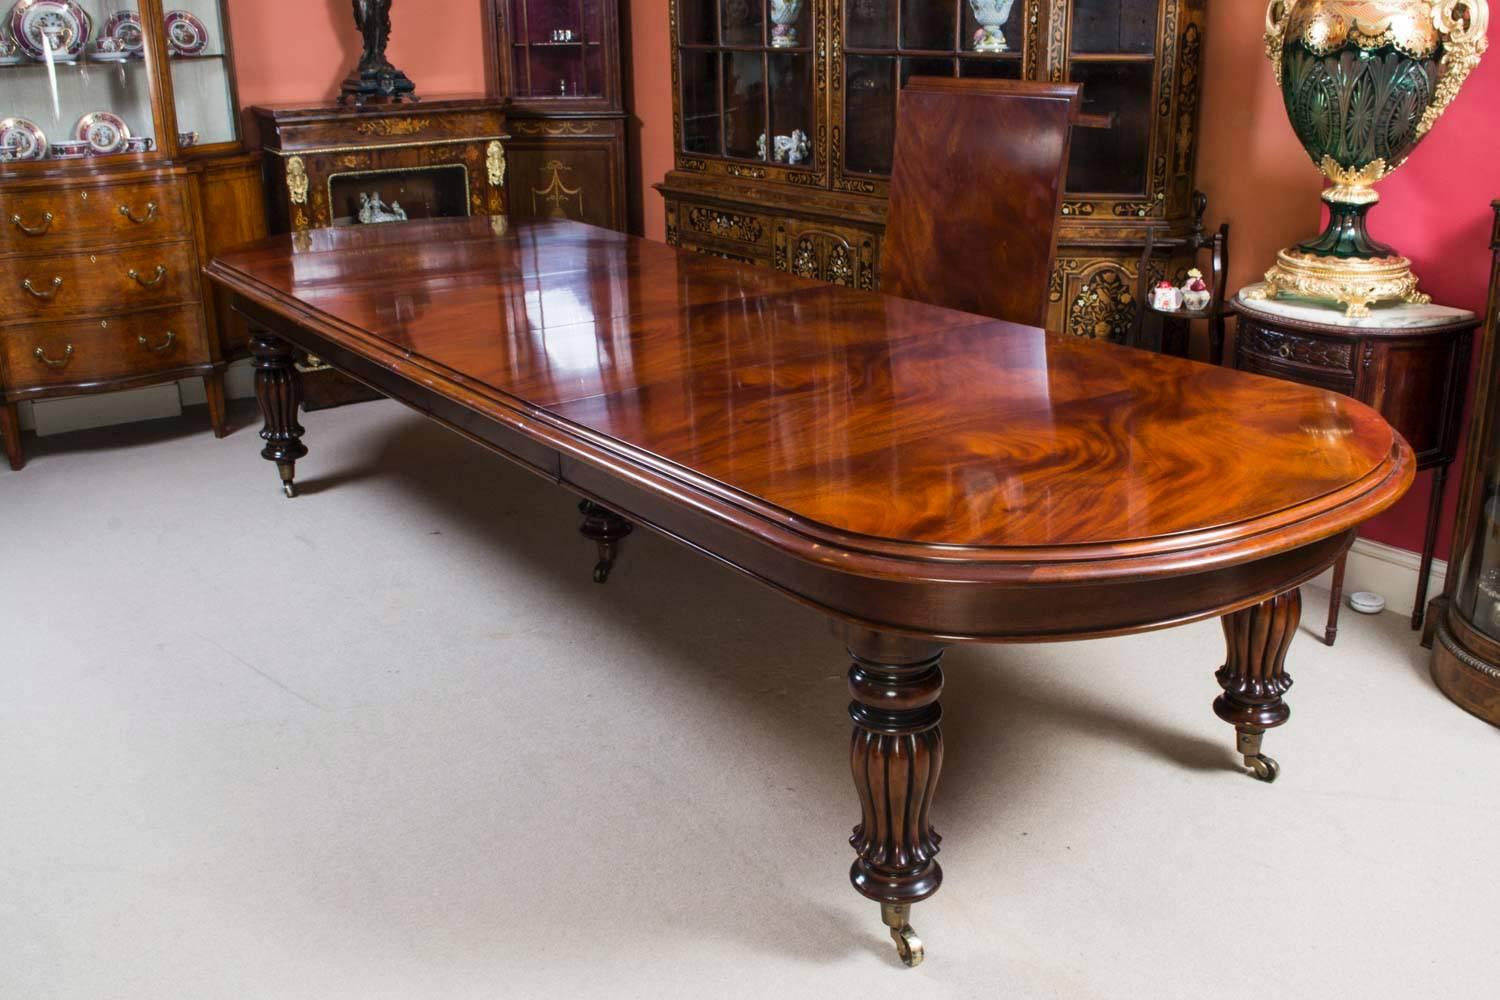 This is a magnificent vintage Victorian style mahogany dining table which can seat fourteen diners in comfort and is also ideal for use as a conference table.

This beautiful table is in stunning flame mahogany and has three leaves of